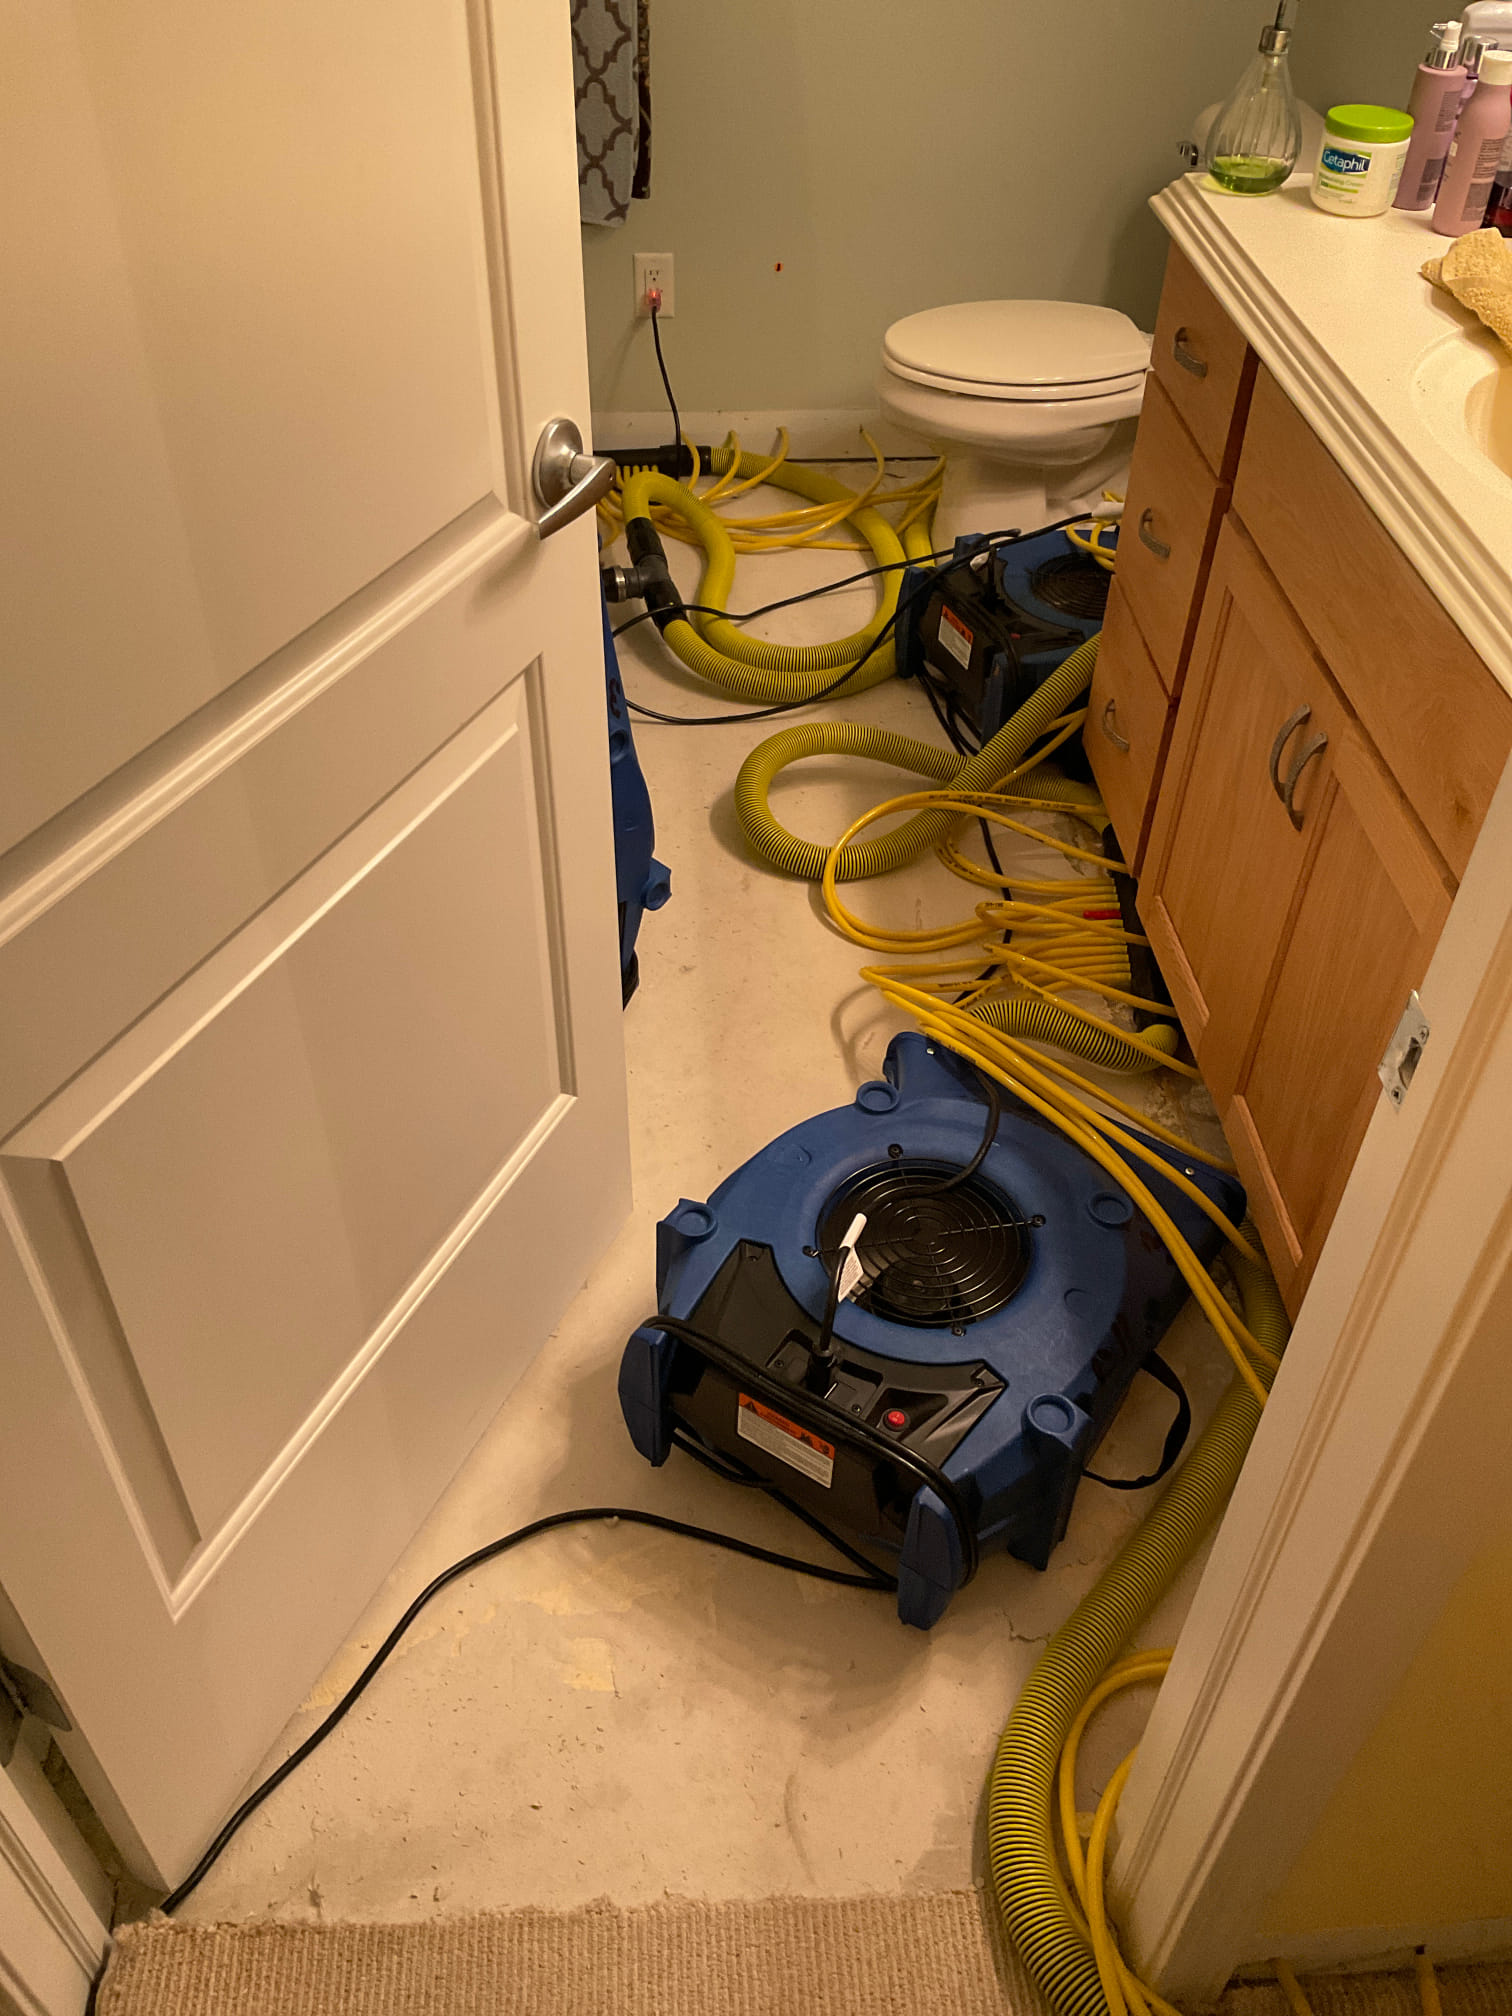 Drying of bathroom and cabinet